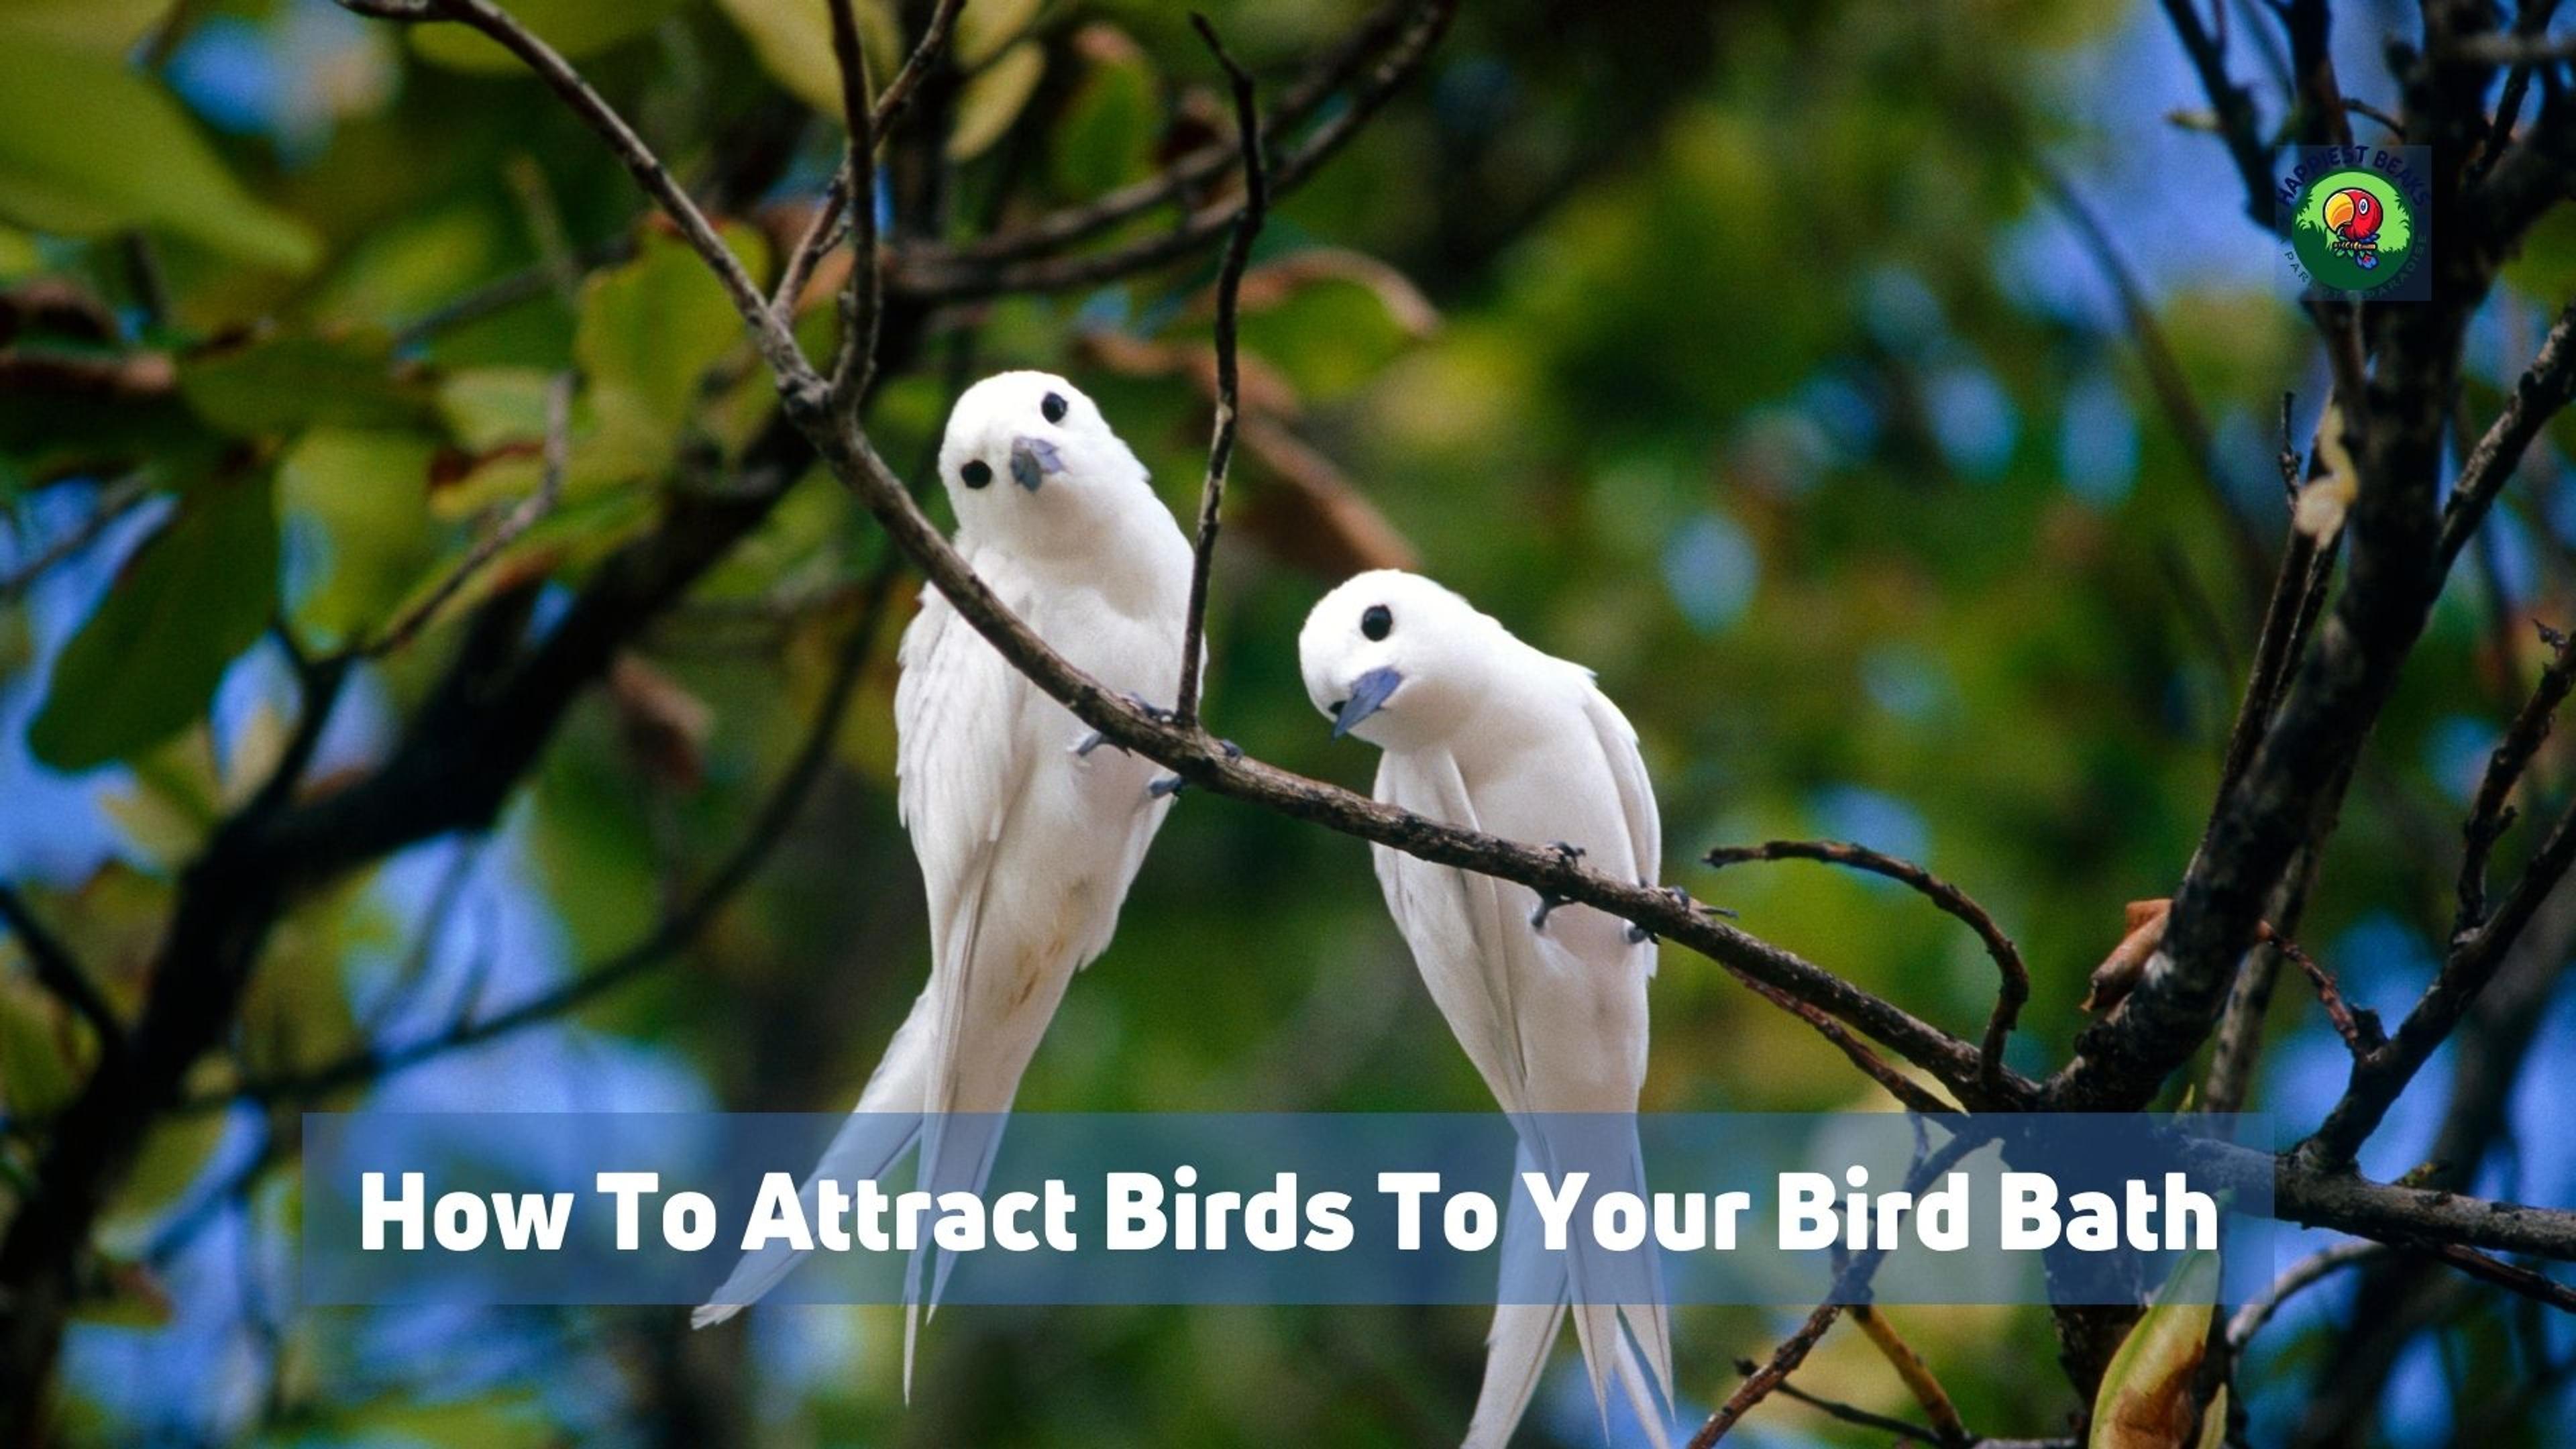 How To Attract Birds To Your Bird Bath